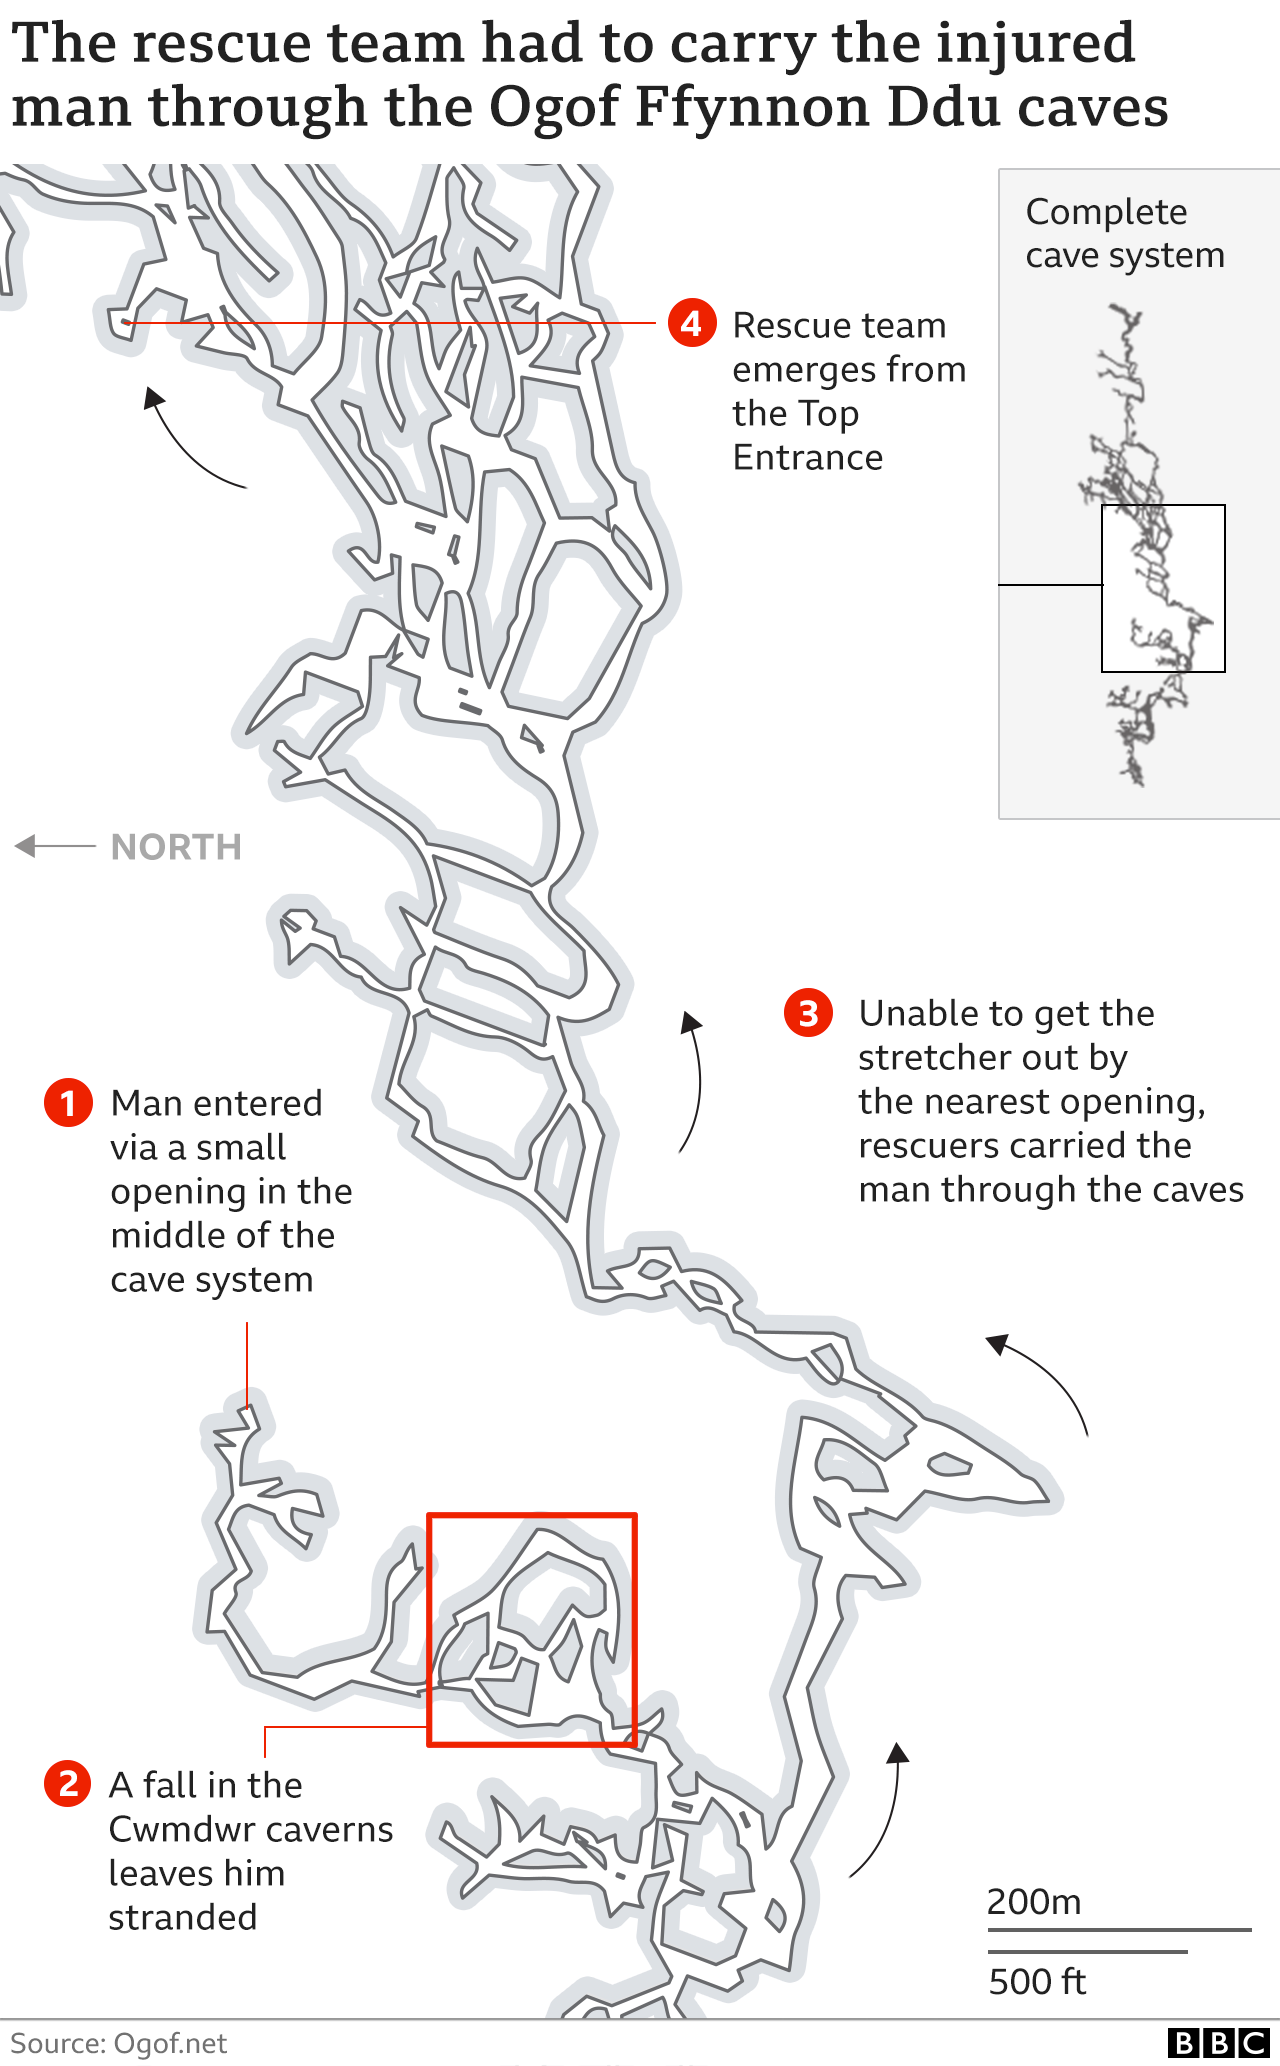 Graphic: The rescue team had to carry the injured man through the Ogof Ffynnon Ddu caves